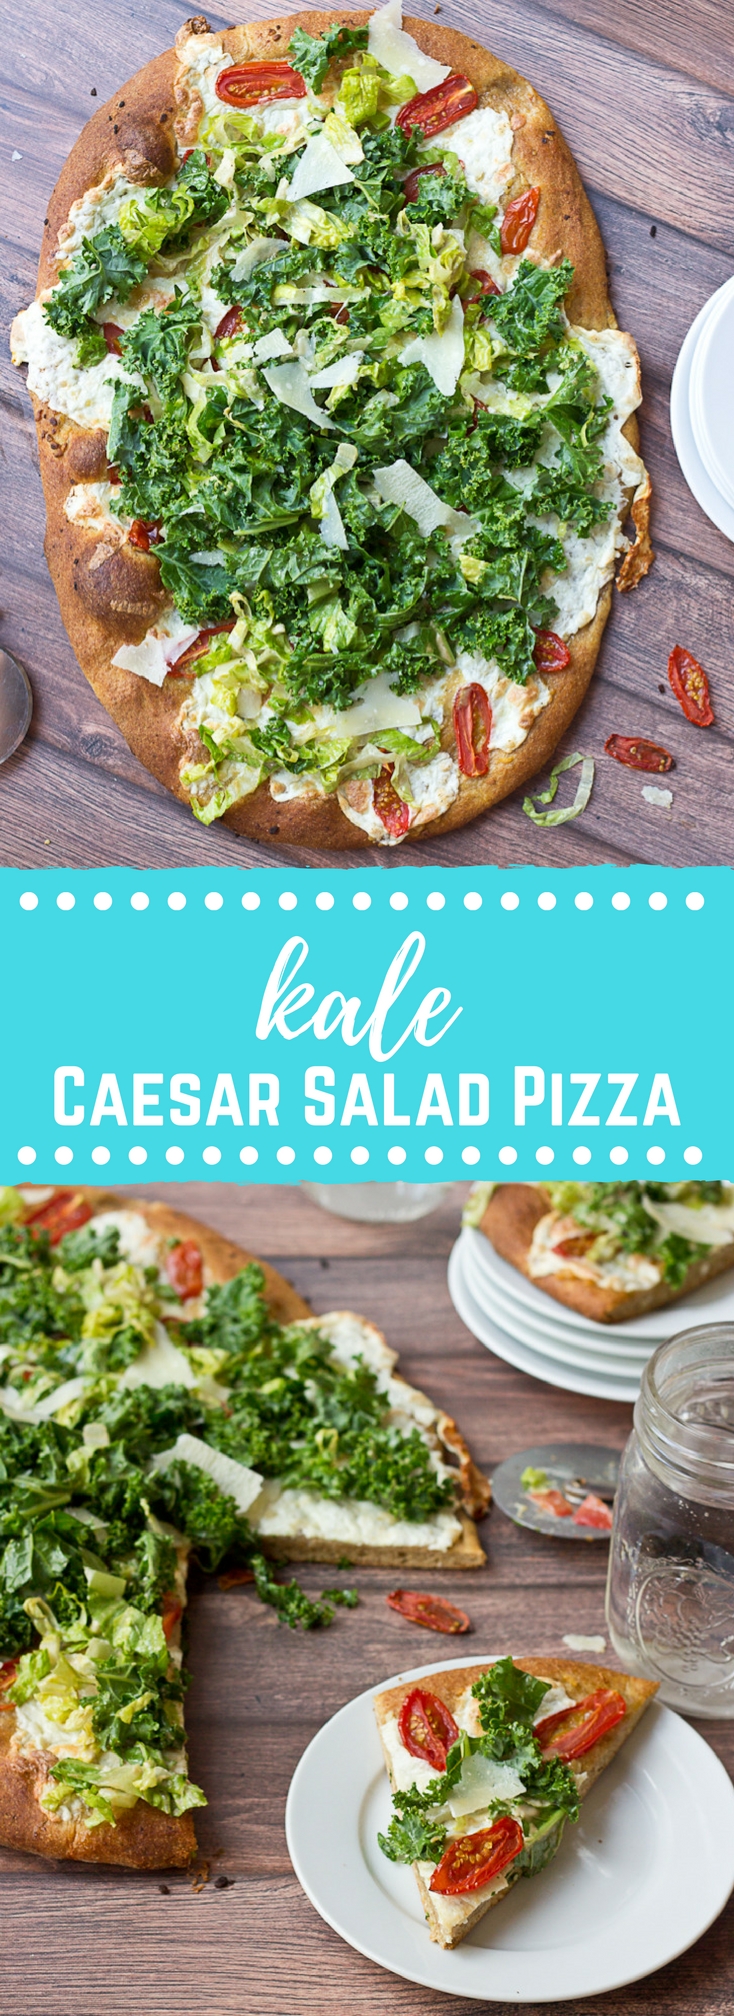 Get your Kale Caesar Salad Pizza on!! This pizza will be the talk of the town, a delicious Pizza blanca with roasted tomatoes, garlic and fresh mozzarella topped with loads of Kale Caesar Salad.